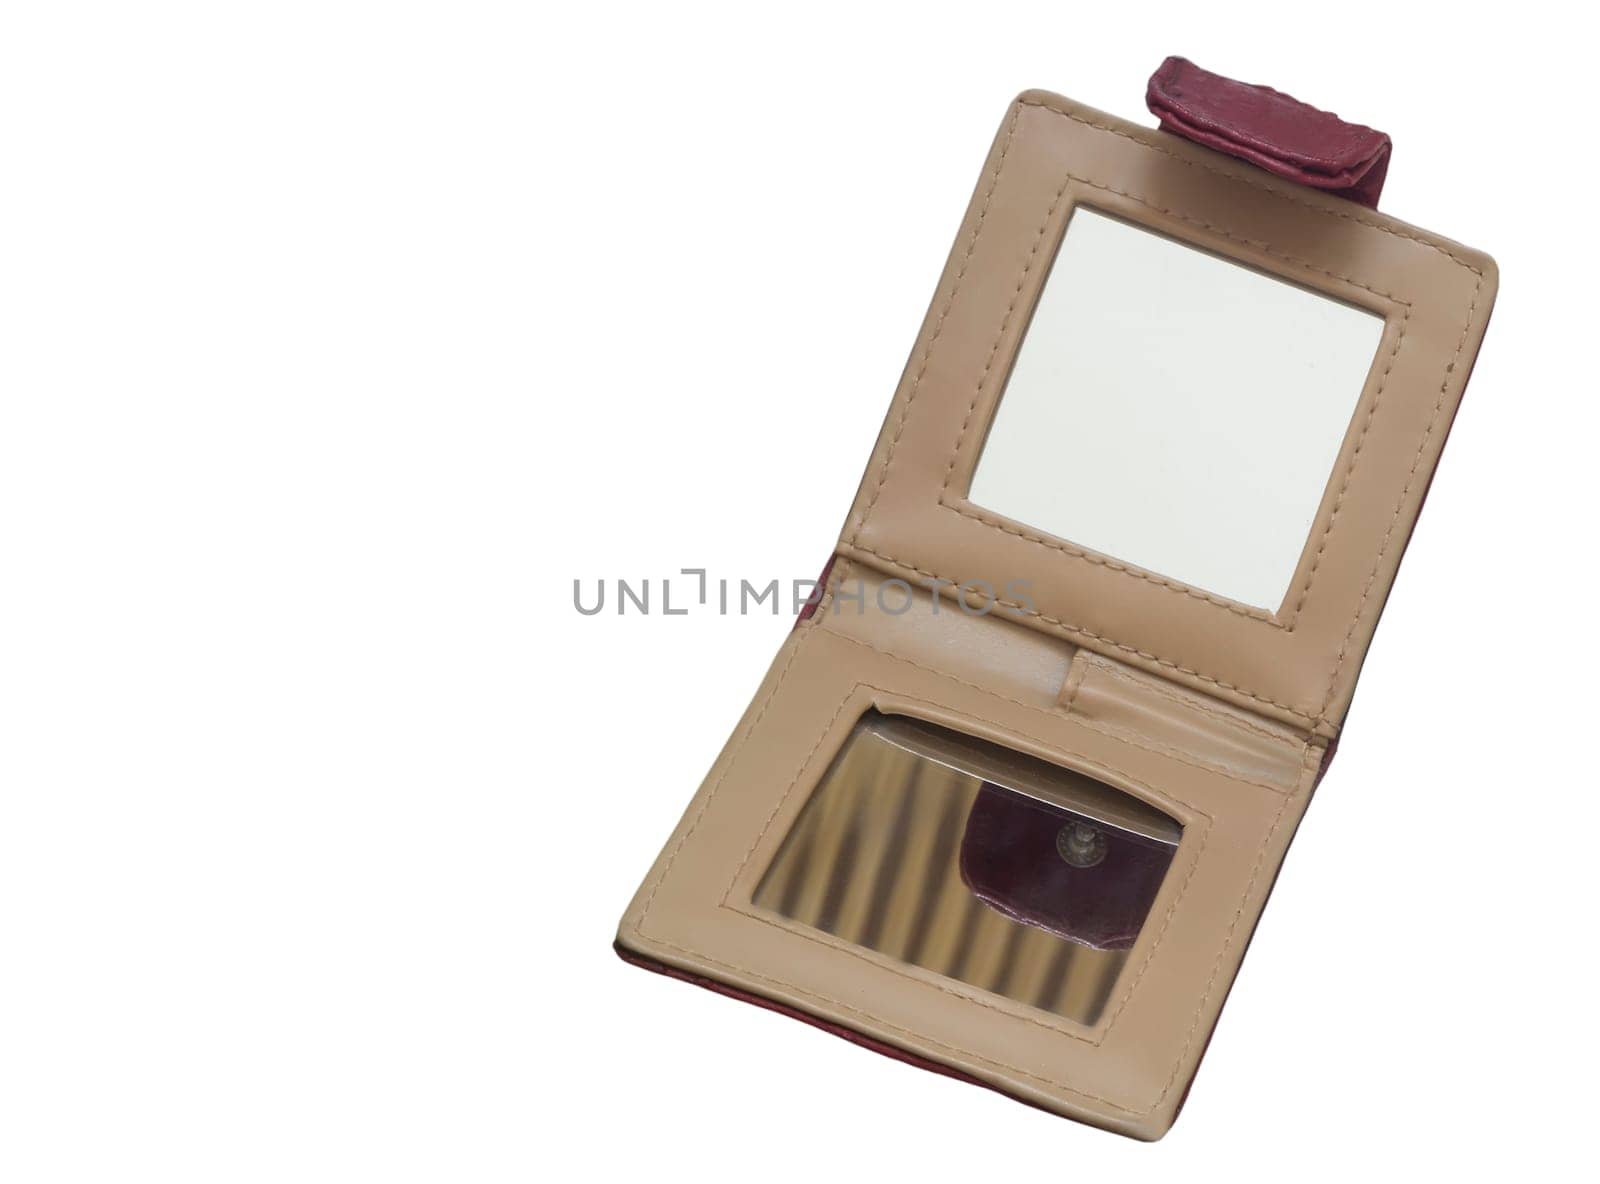 Folding mirror compact for women on a leather cover. Presented on a white background.